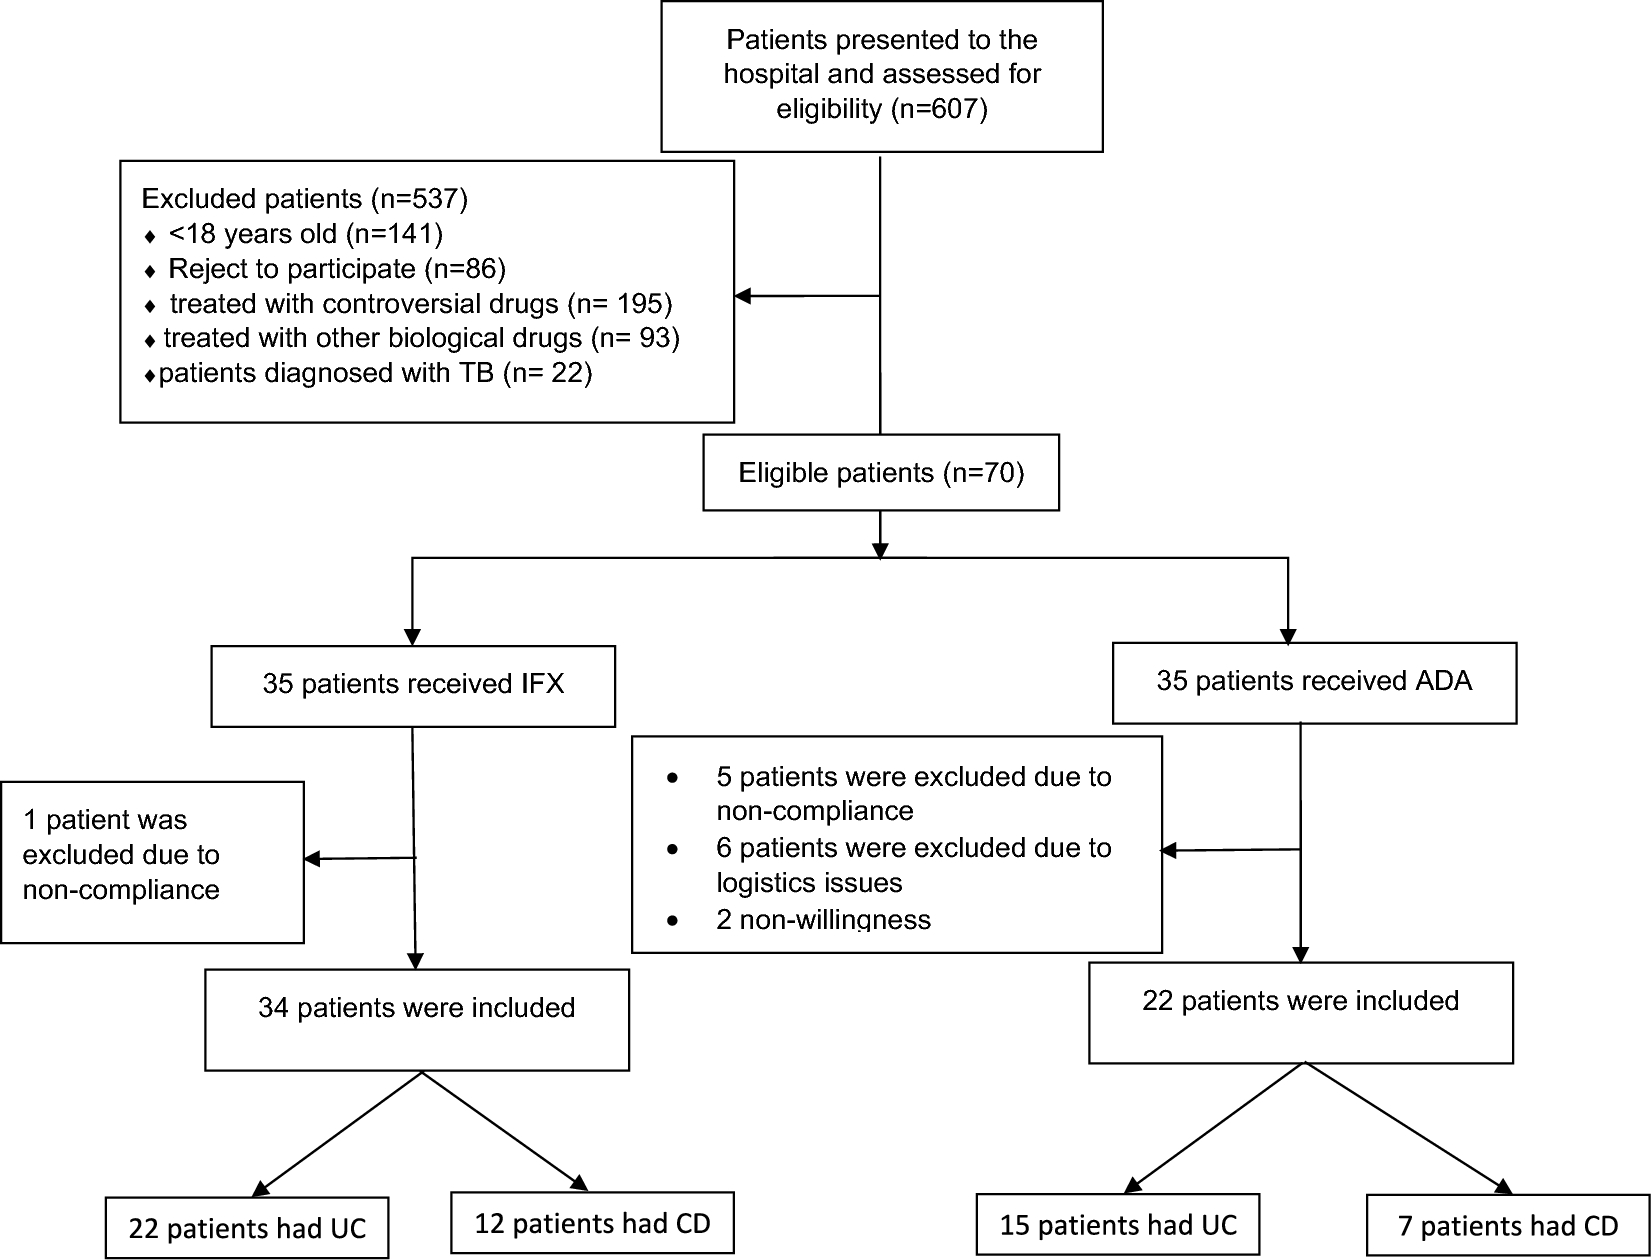 Efficacy and safety of infliximab and adalimumab in inflammatory bowel disease patients